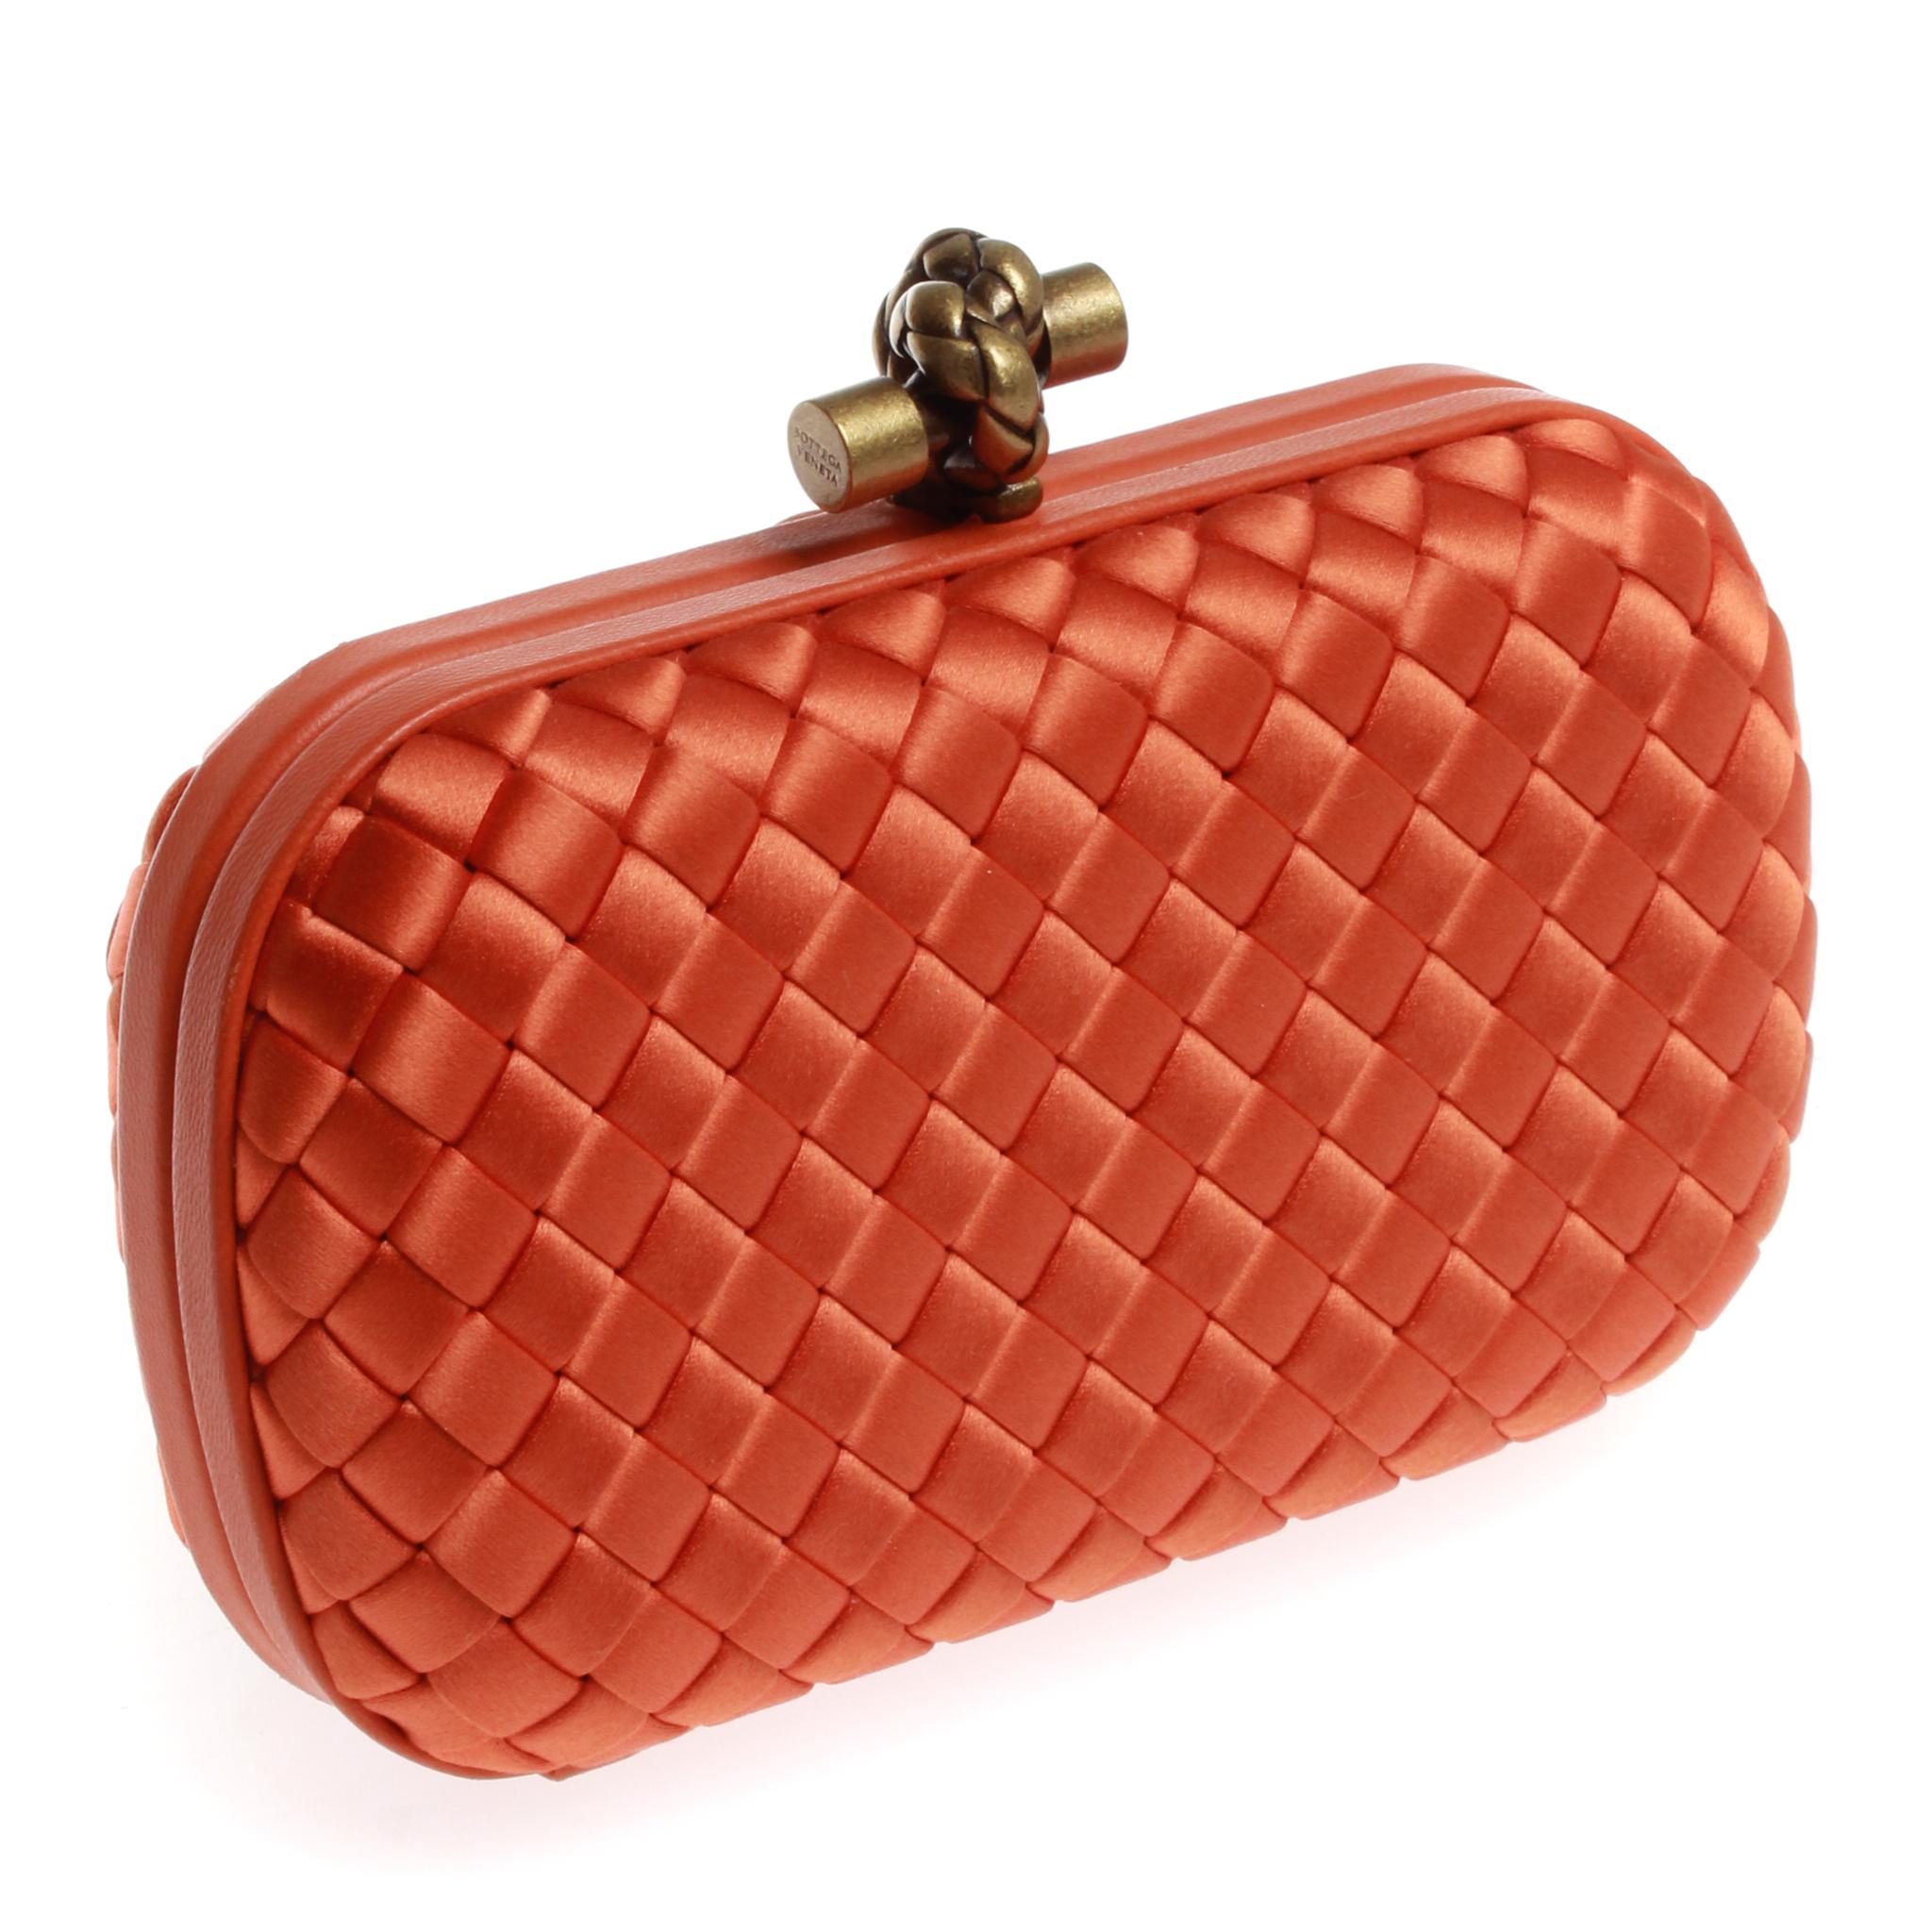 Bottega Veneta knot satin clutch in bright orange, with gold hardware and dust cover, in very good condition.